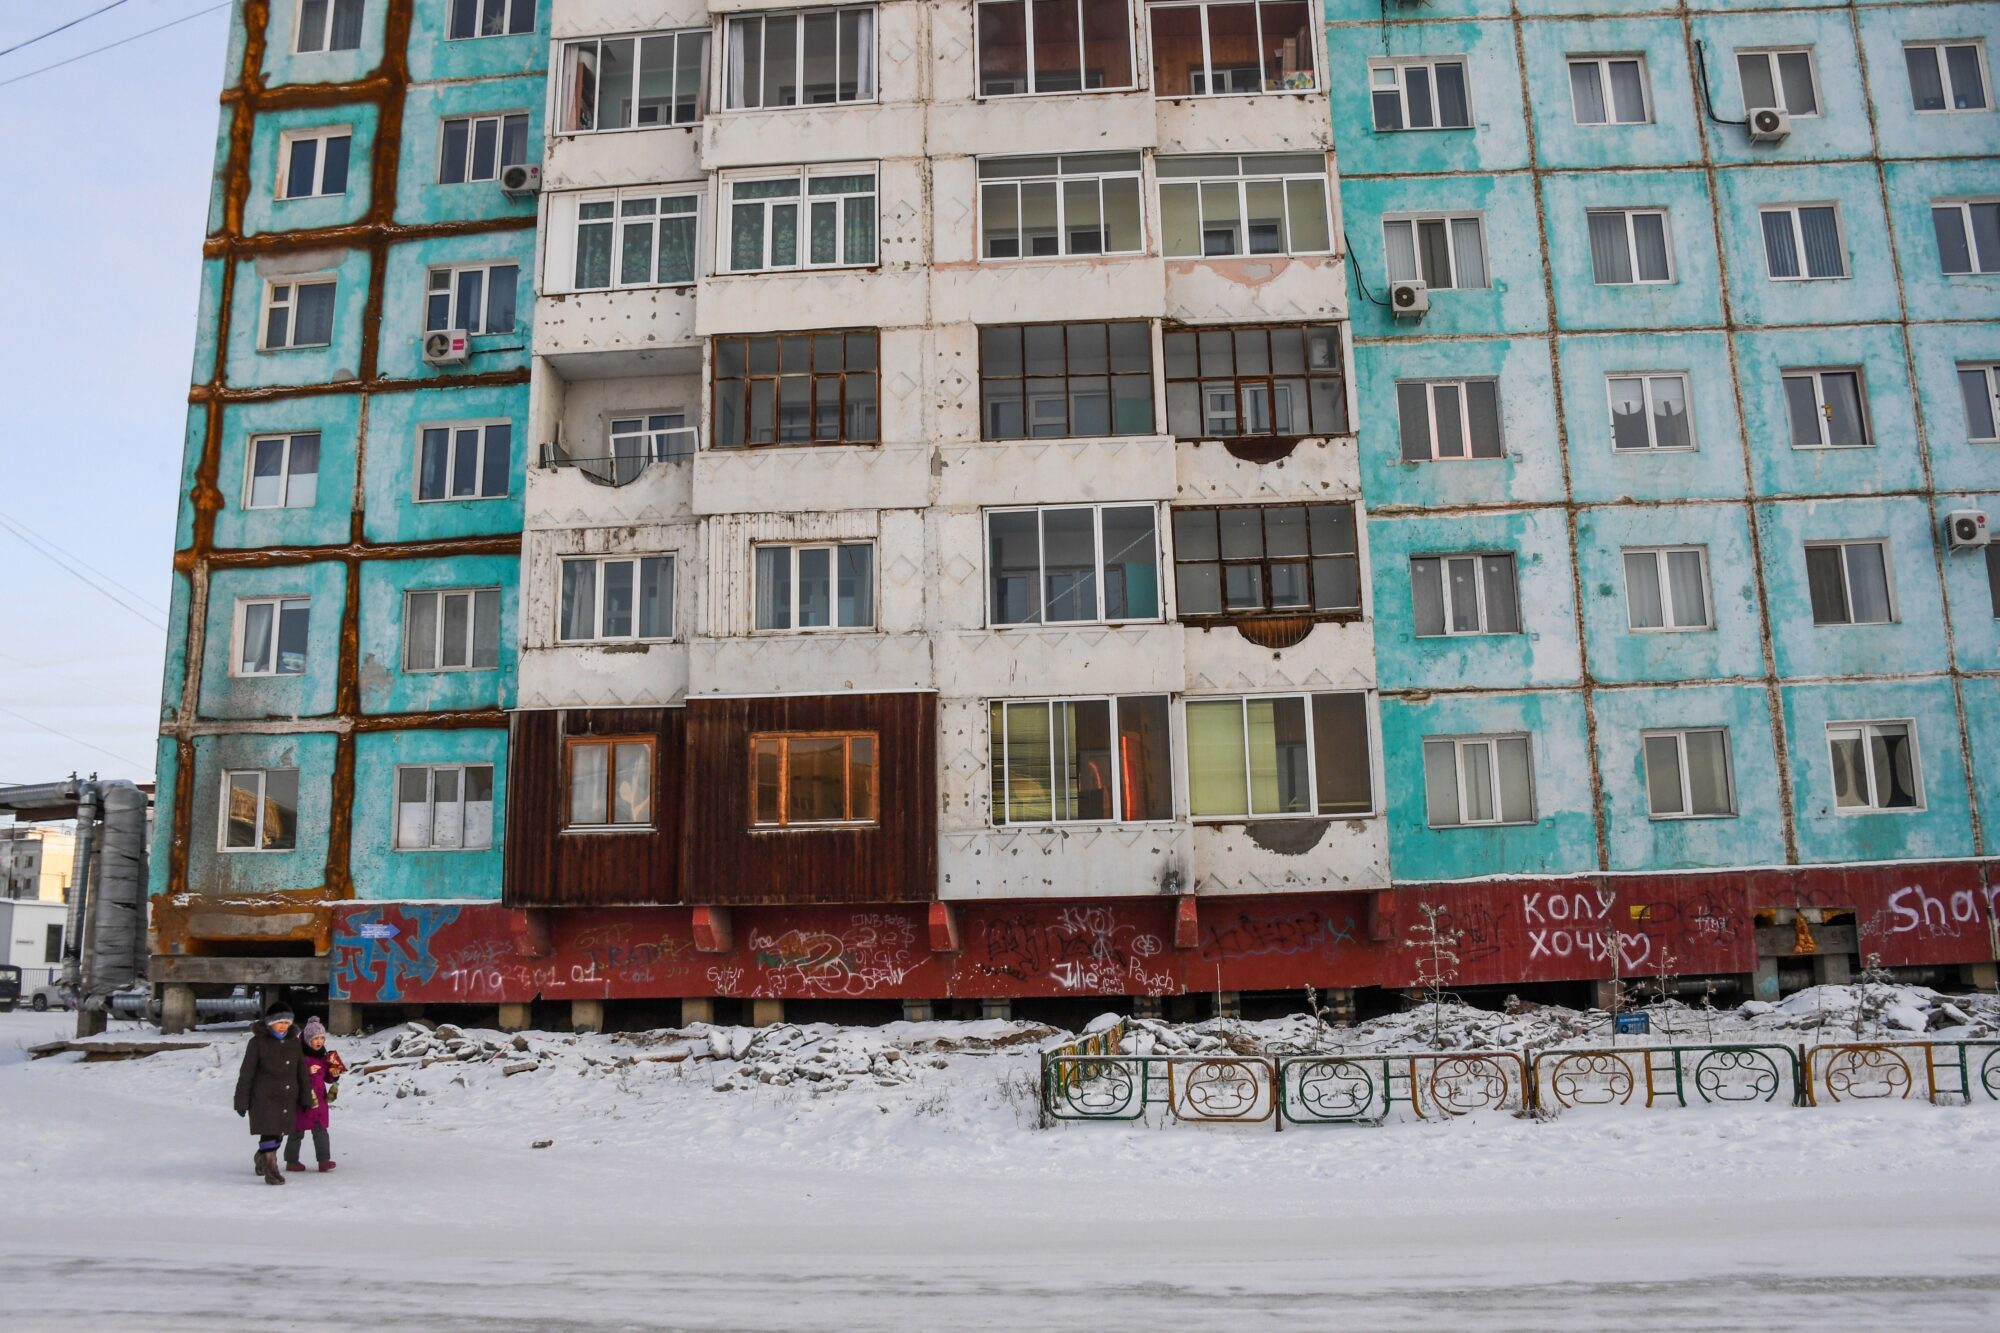 Two people walk along a snowy street in front of a large apartment building. The building's paint is fading, panels are cracked, and is covered in graffiti.